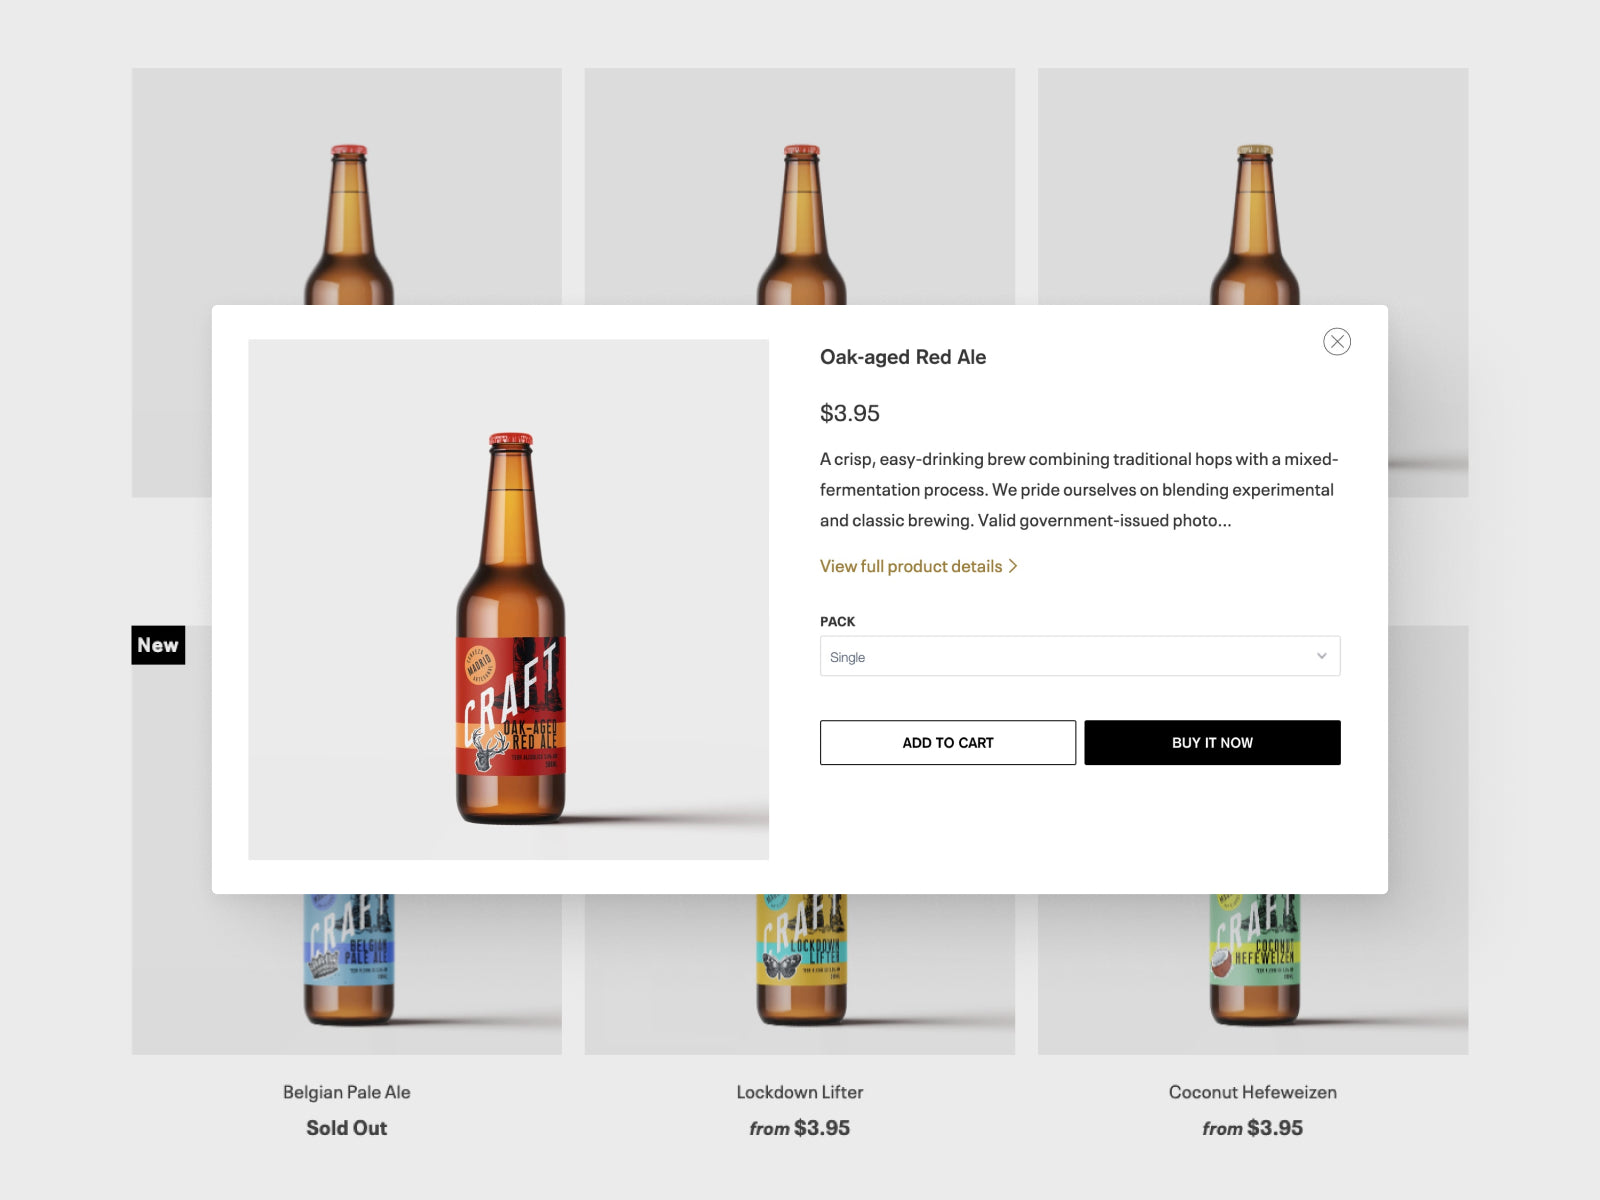 quick shop modal window with beer product image title and description